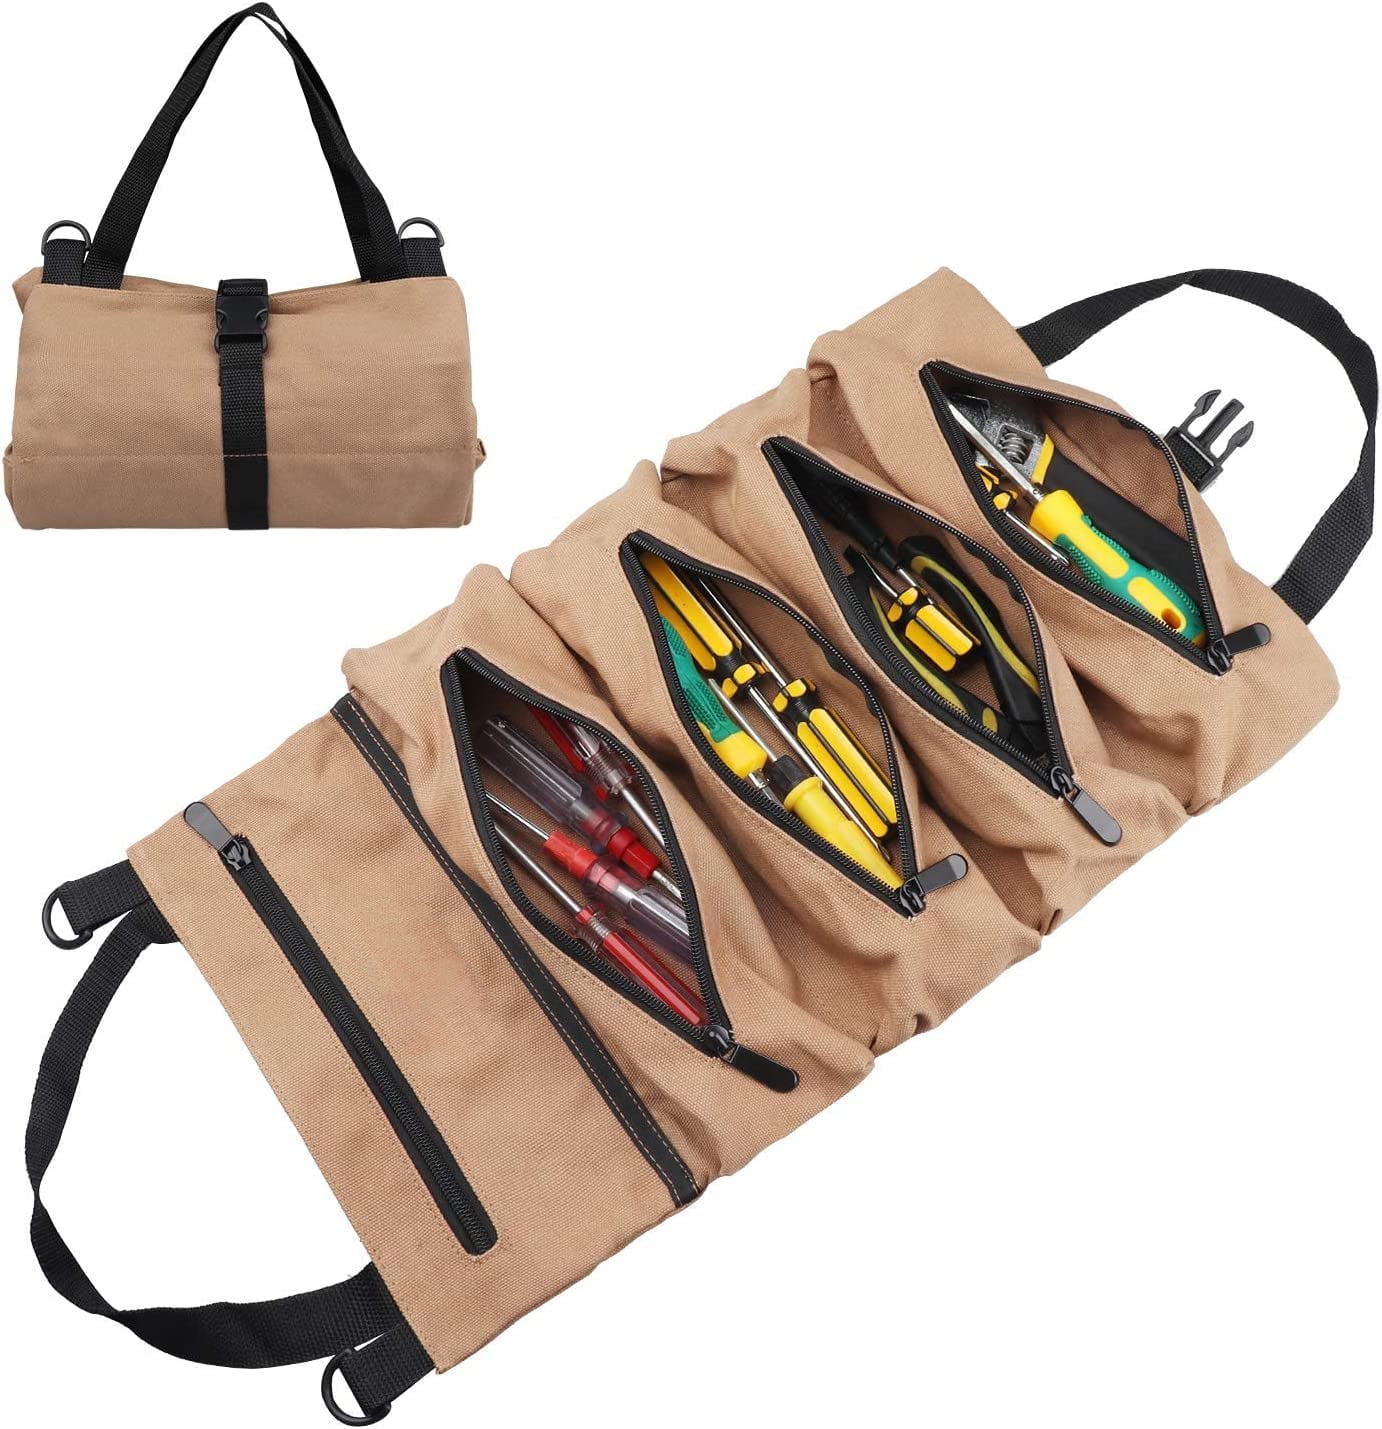 Tool Roll Up Bag, Canvas Multi-Purpose Wrench Roll Up Bag, 5